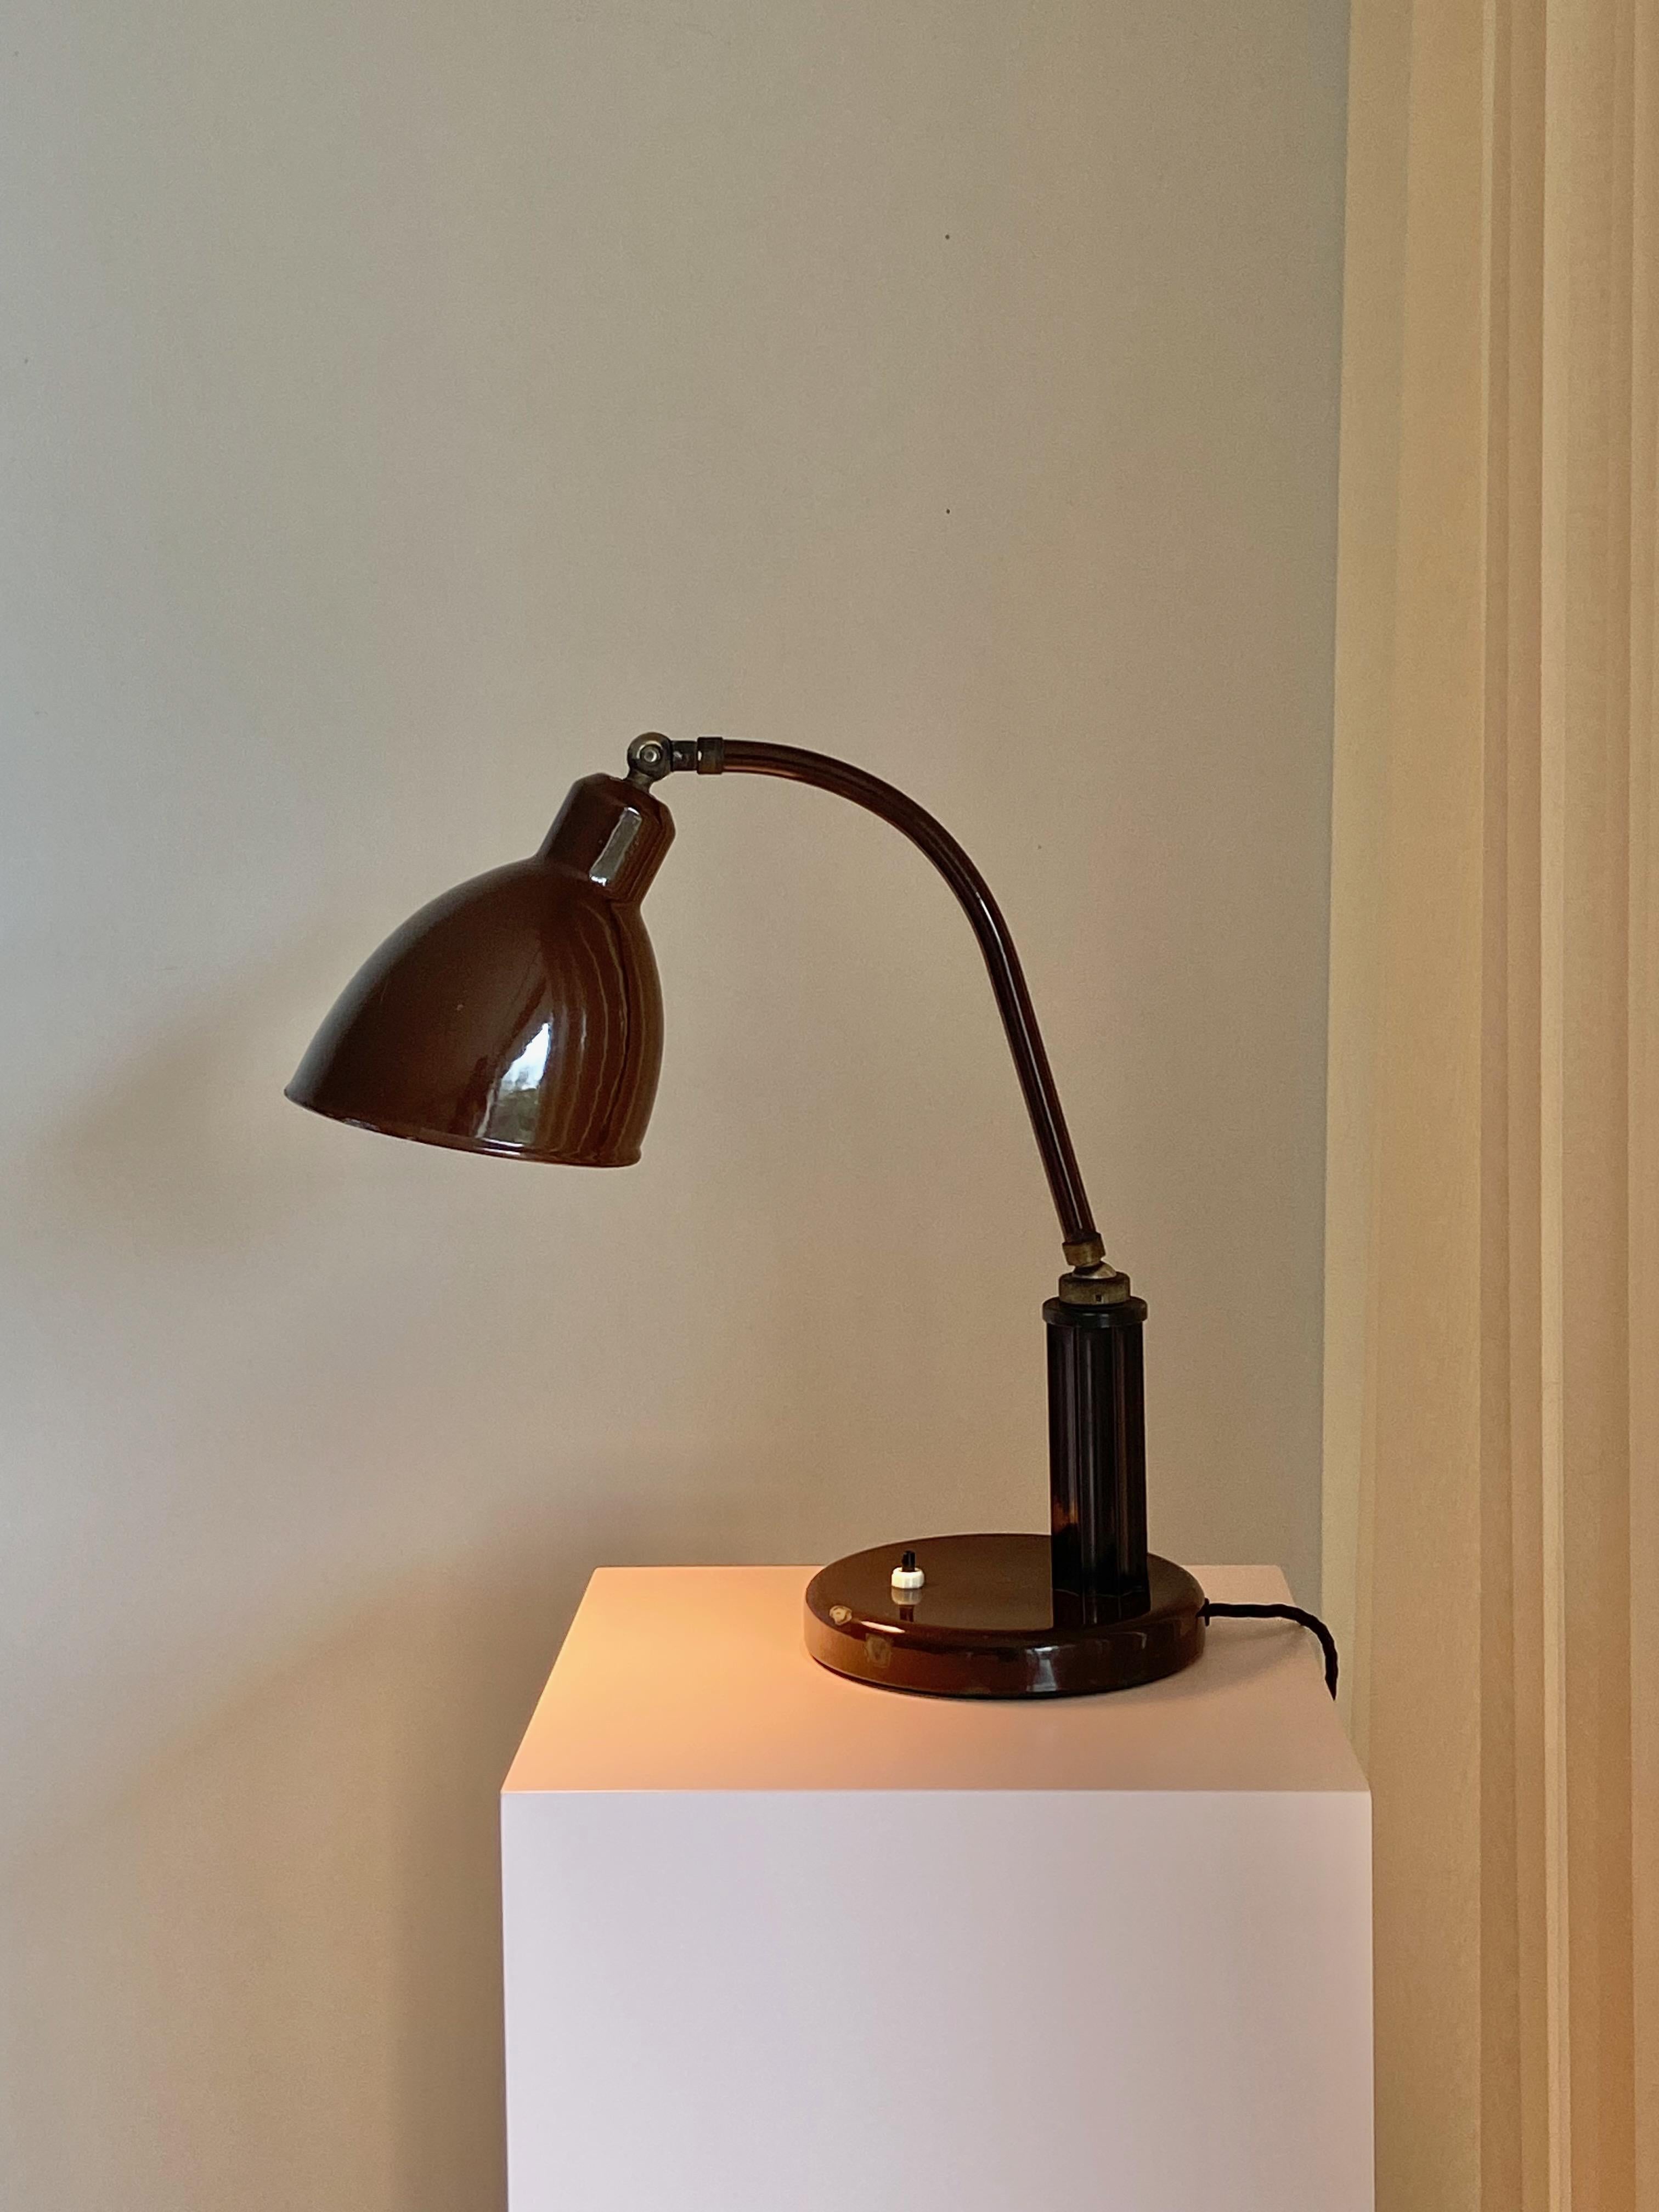 Molitor Grapholux Lamp Brown Enamel and Bakelite Stick by Christian Dell 1930s For Sale 5